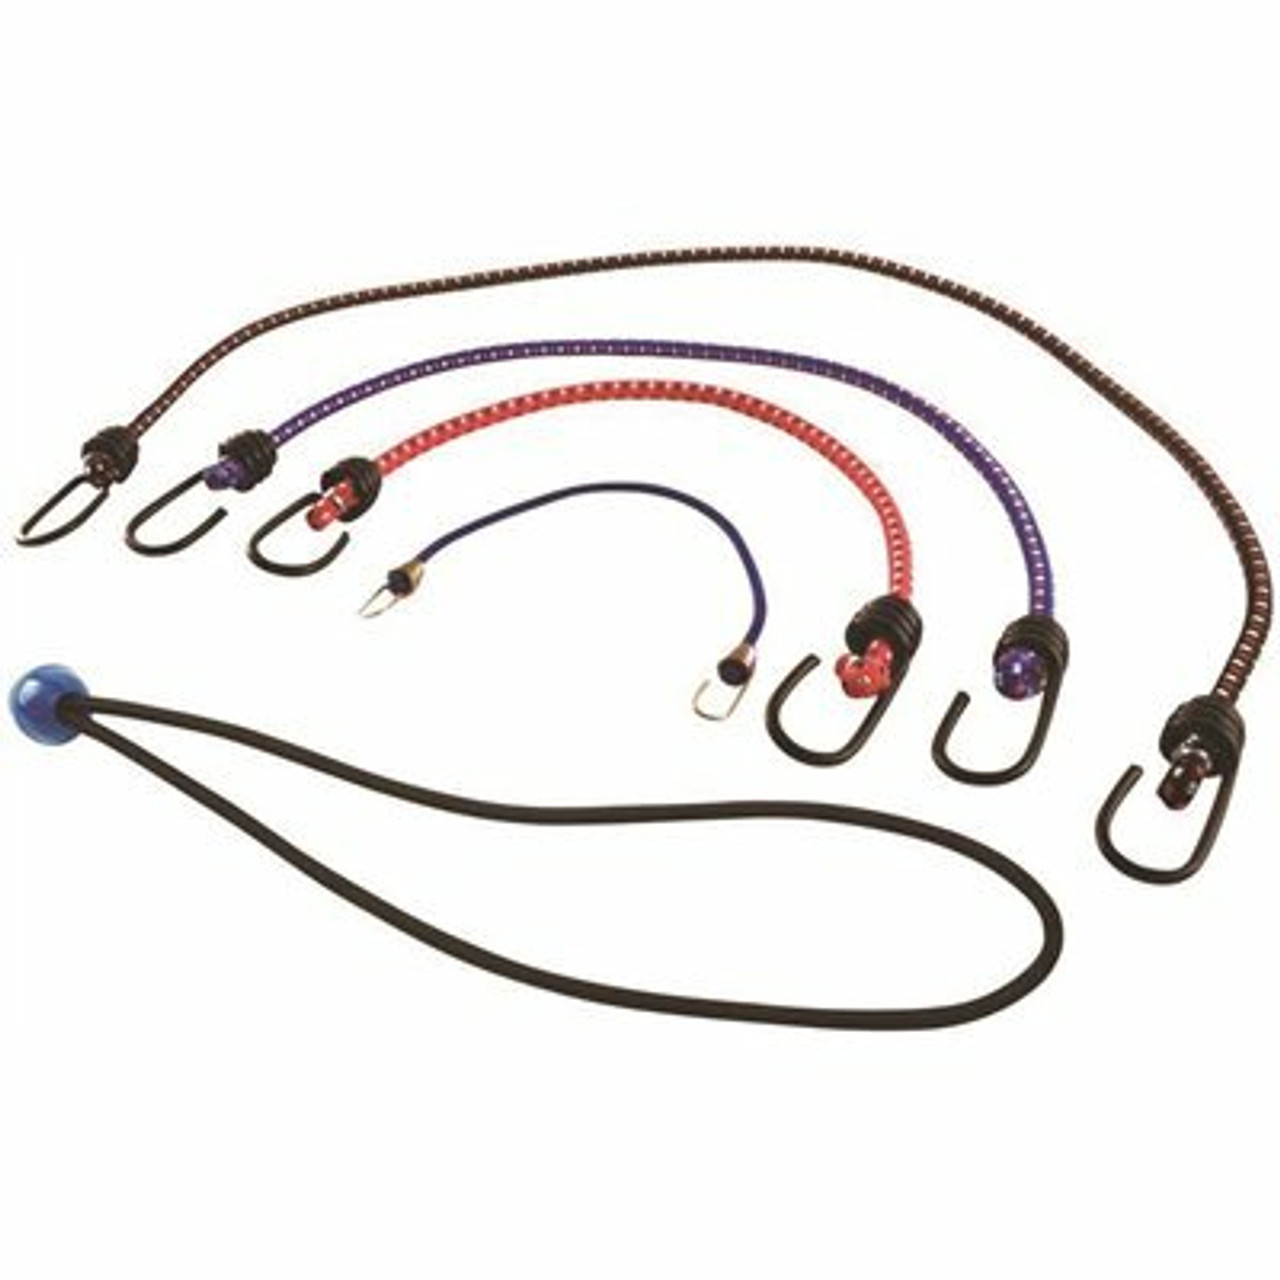 Progrip Assorted Bungee Cord